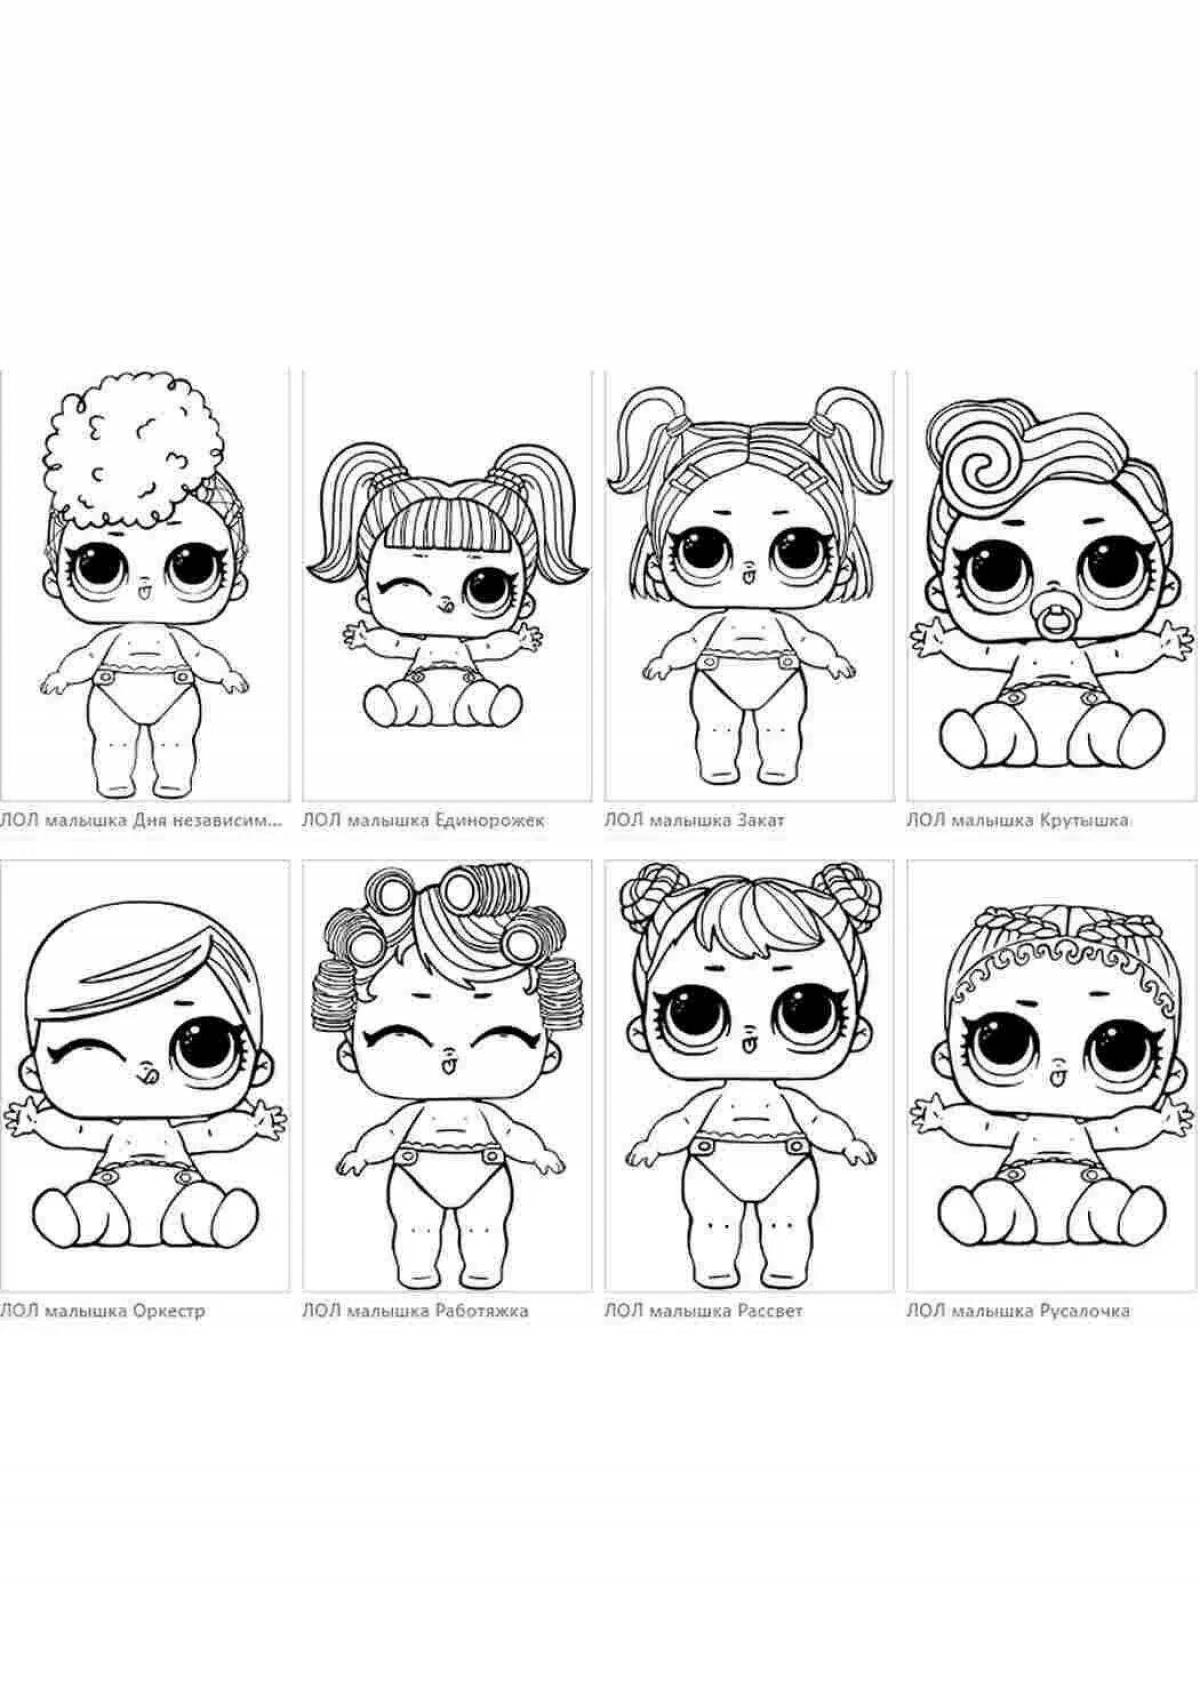 Live coloring of lol dolls and their pets